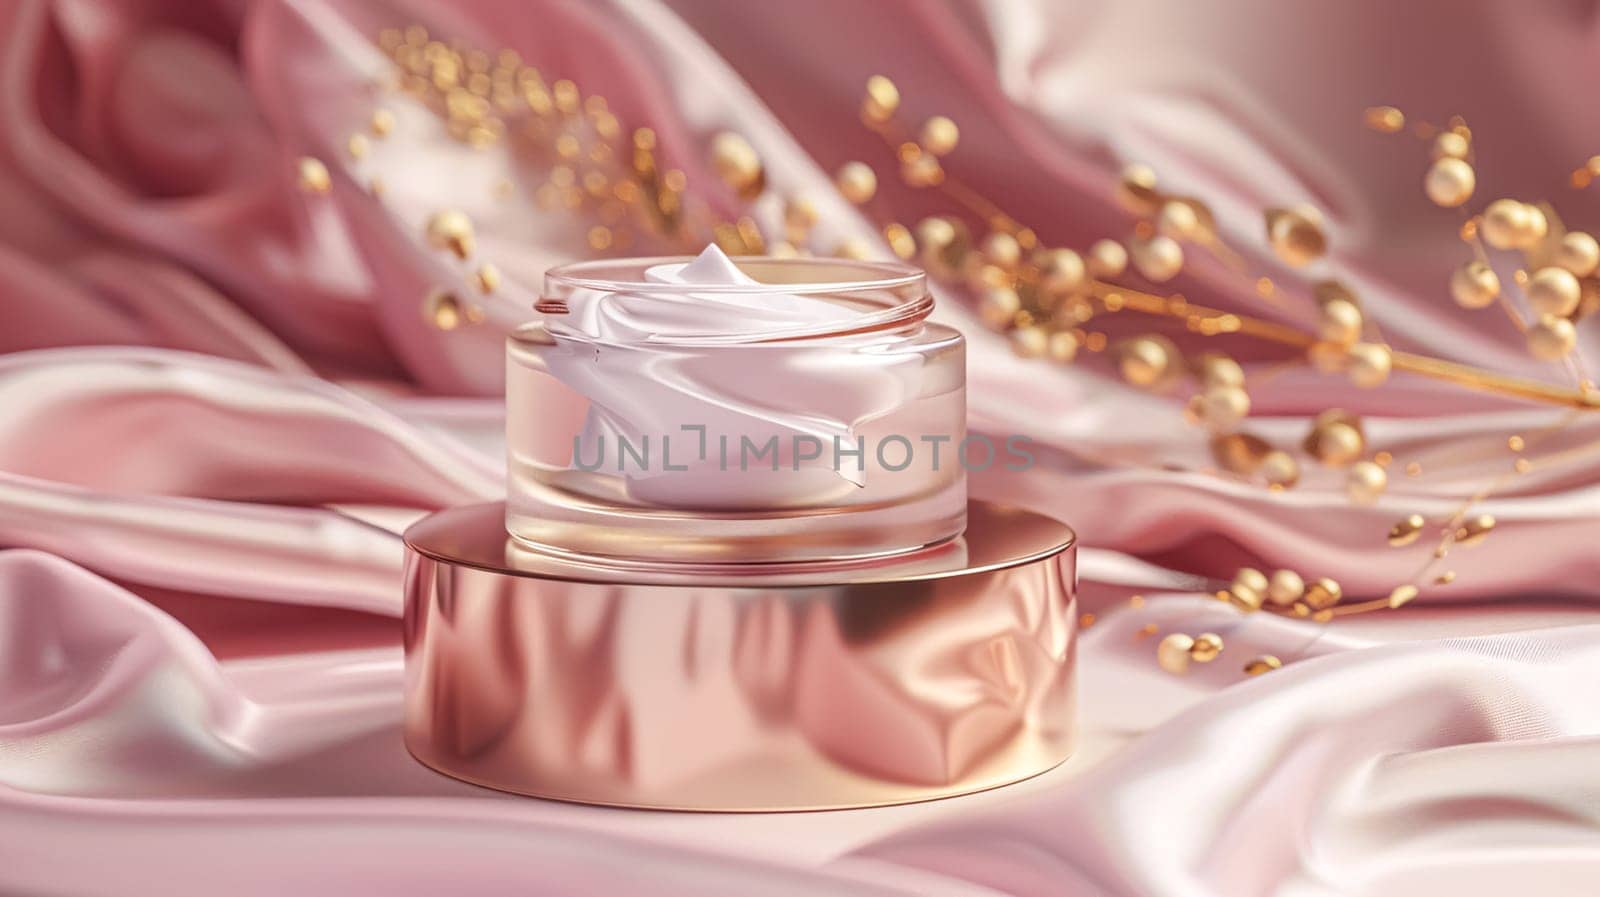 Cosmetic cream in a glass jar on a pink background. Skin care concept. Backdrop for beauty products